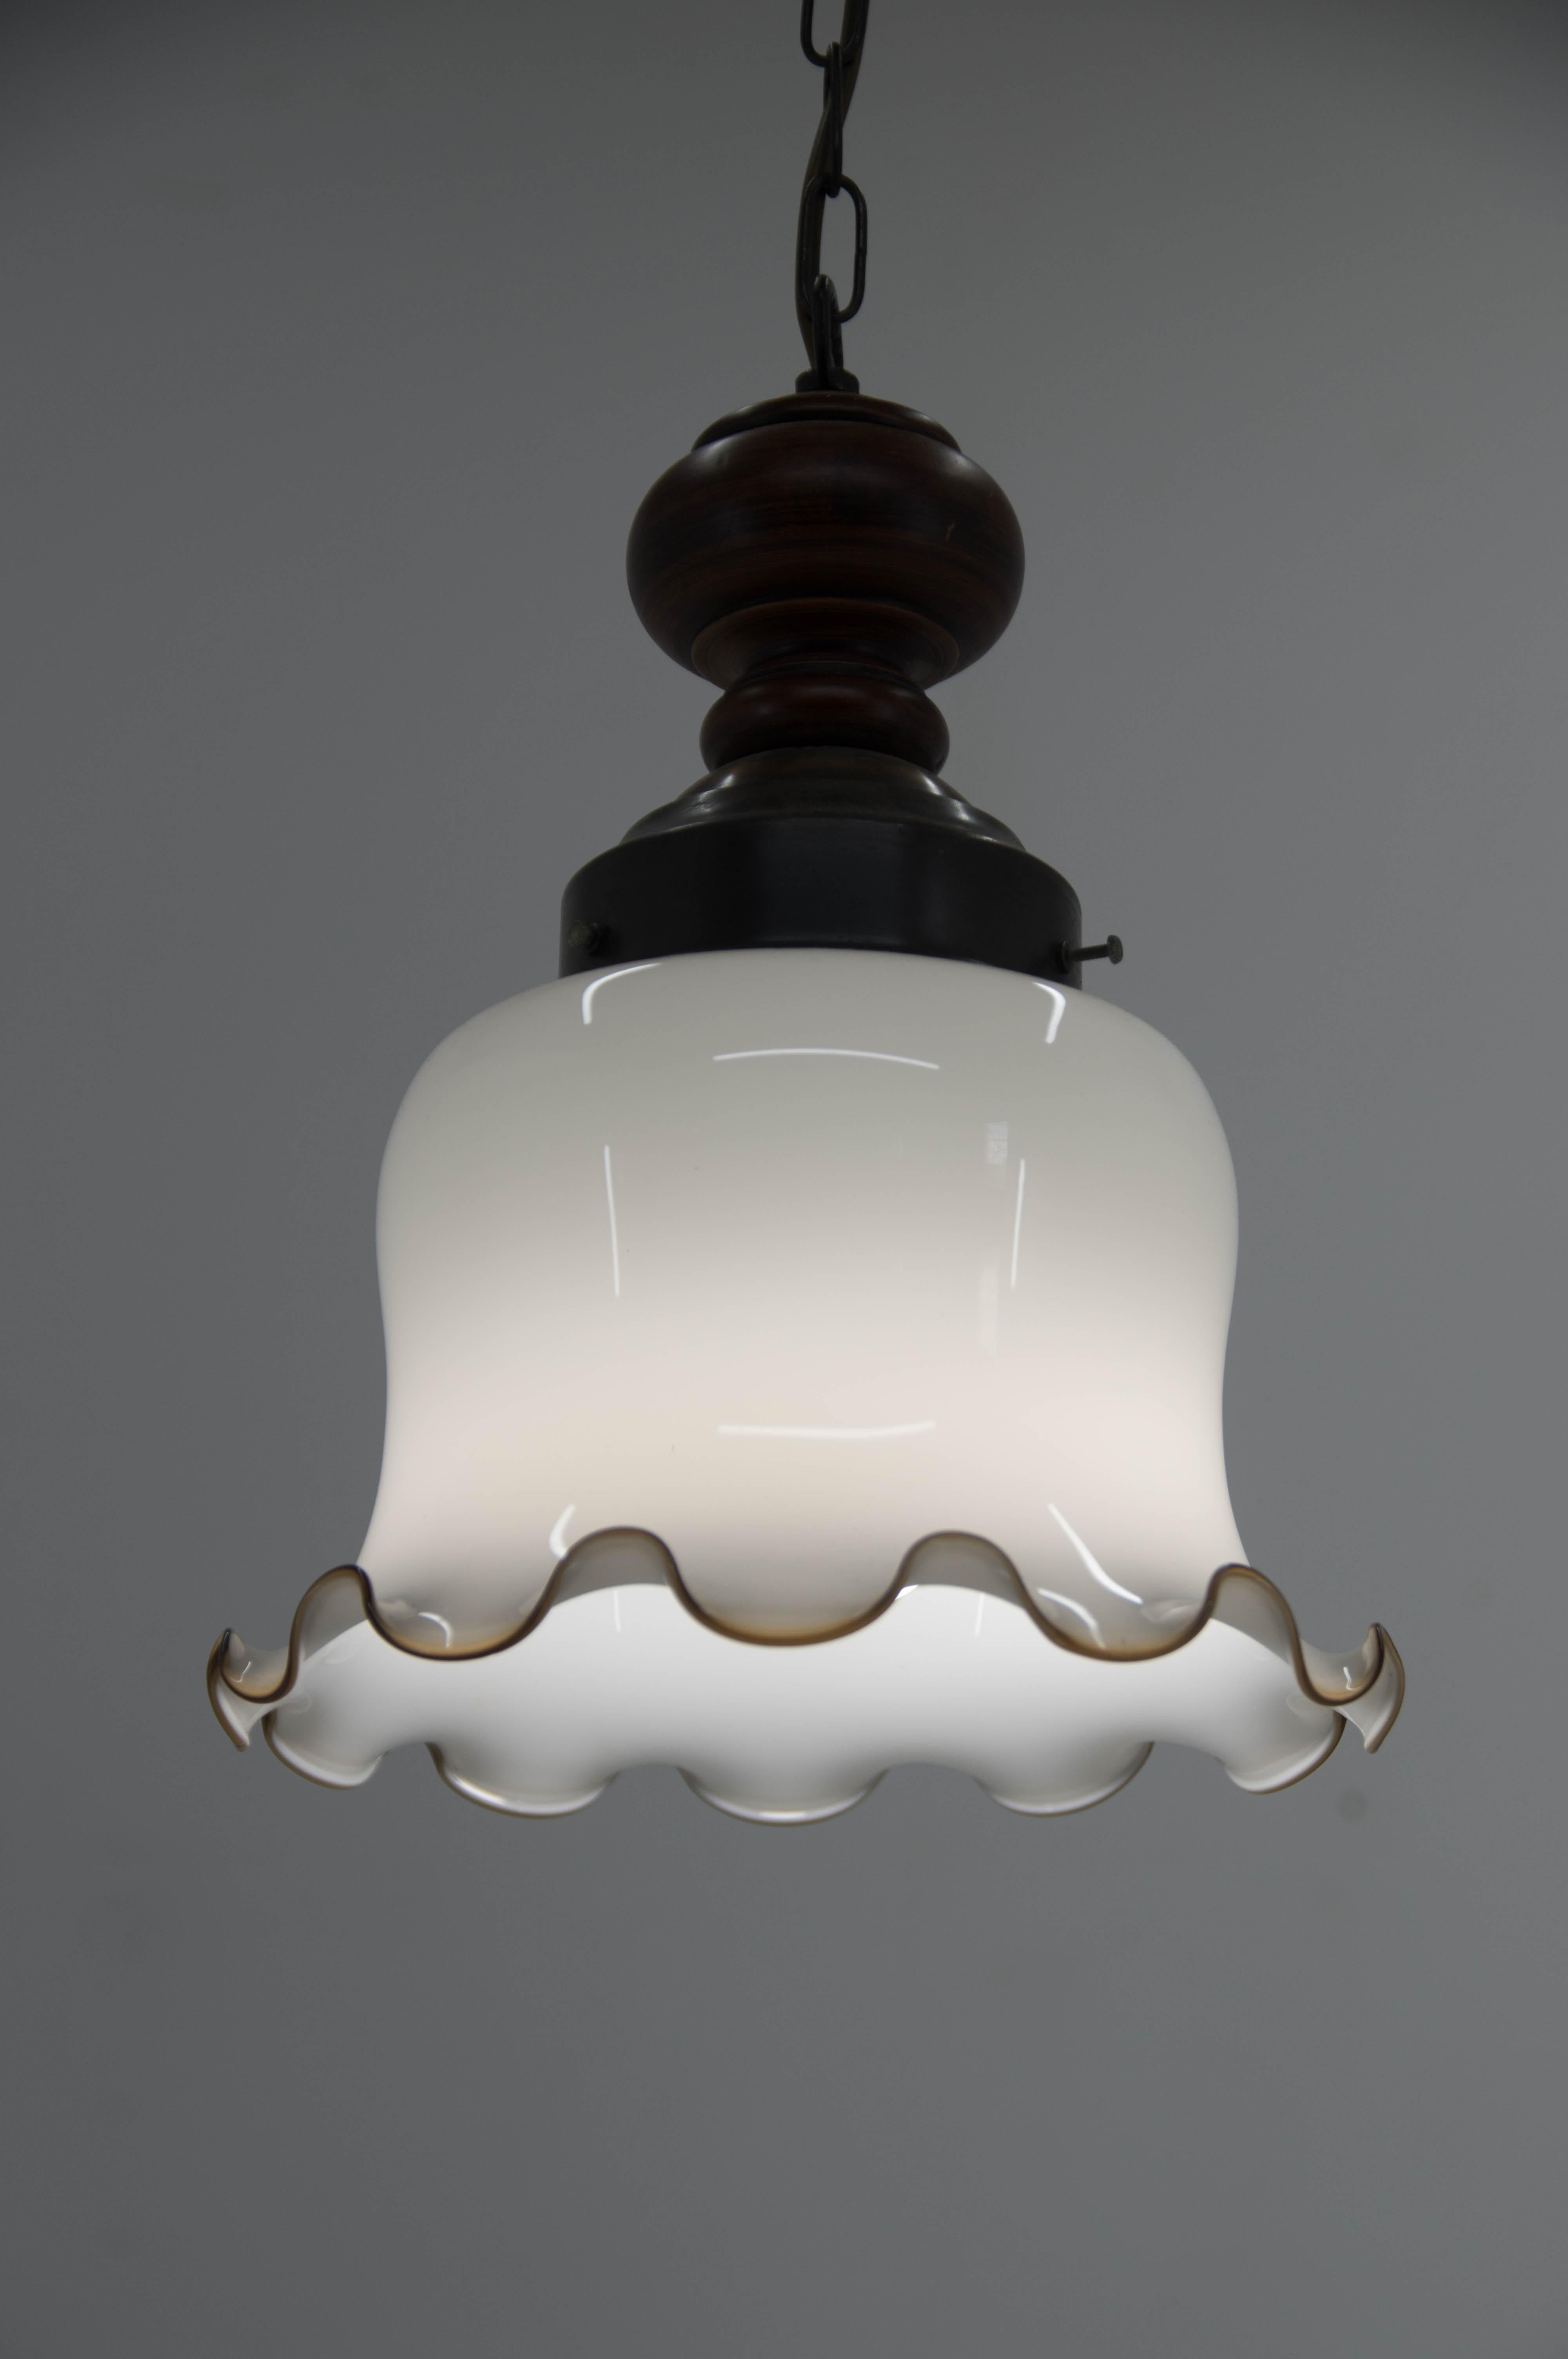 White glass pendant in perfect condition.
The chain can be shorten on request.
1x60W, E25-E27 bulb
US wiring compatible